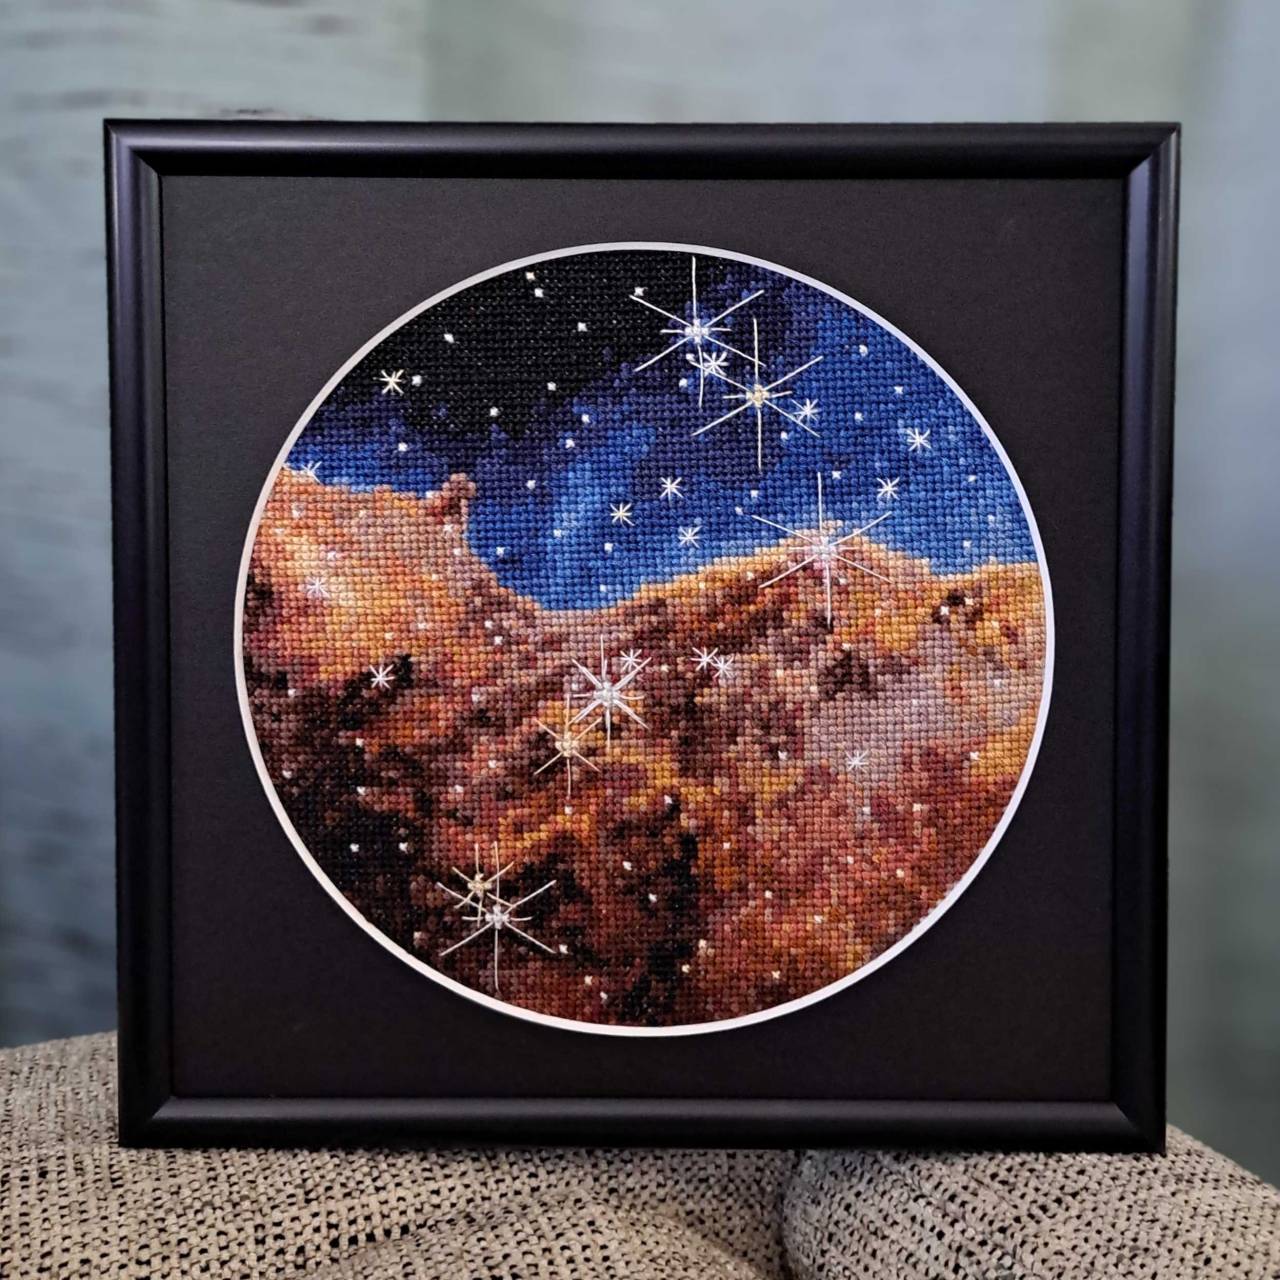 hThis embroidered image shows the Carina Nebula captured by the James Webb Space Telescope. The image is framed in black. At the center a circular piece of art appears outlined in white. At the top of the circle, the thread is dark blue on the left. As you travel down white stars appear in lighter shades of blue. In the middle threads turn to dark black, red and orange to signify the nebula’s gas-like structure.